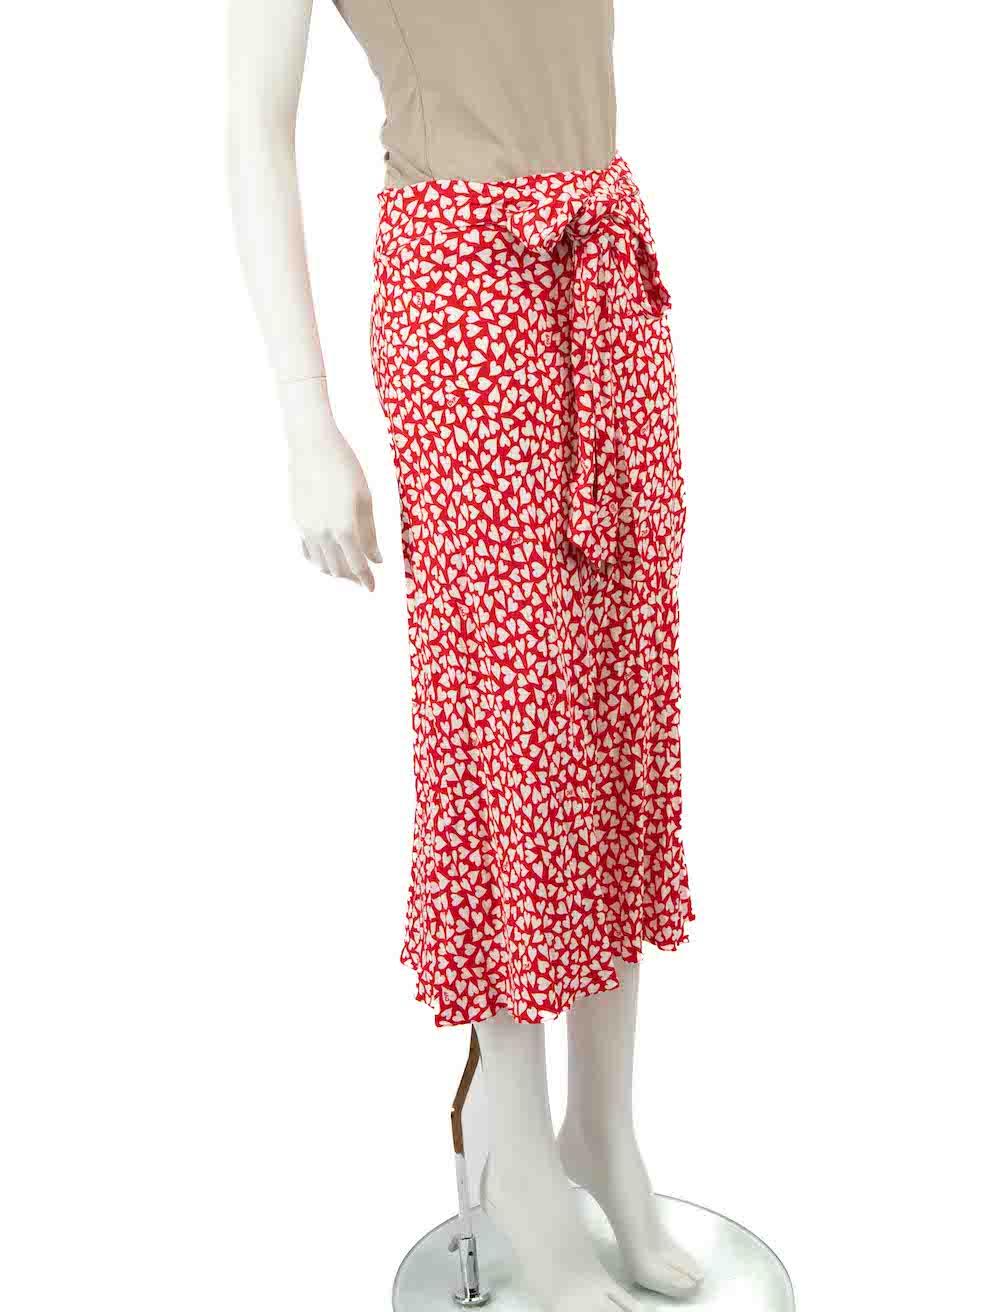 CONDITION is Never worn, with tags. No visible wear to skirt is evident on this new Diane Von Furstenberg designer resale item.
 
 
 
 Details
 
 
 Red
 
 Viscose
 
 Skirt
 
 Heart print
 
 Knee length
 
 Flared
 
 Side zip and hook fastening
 
